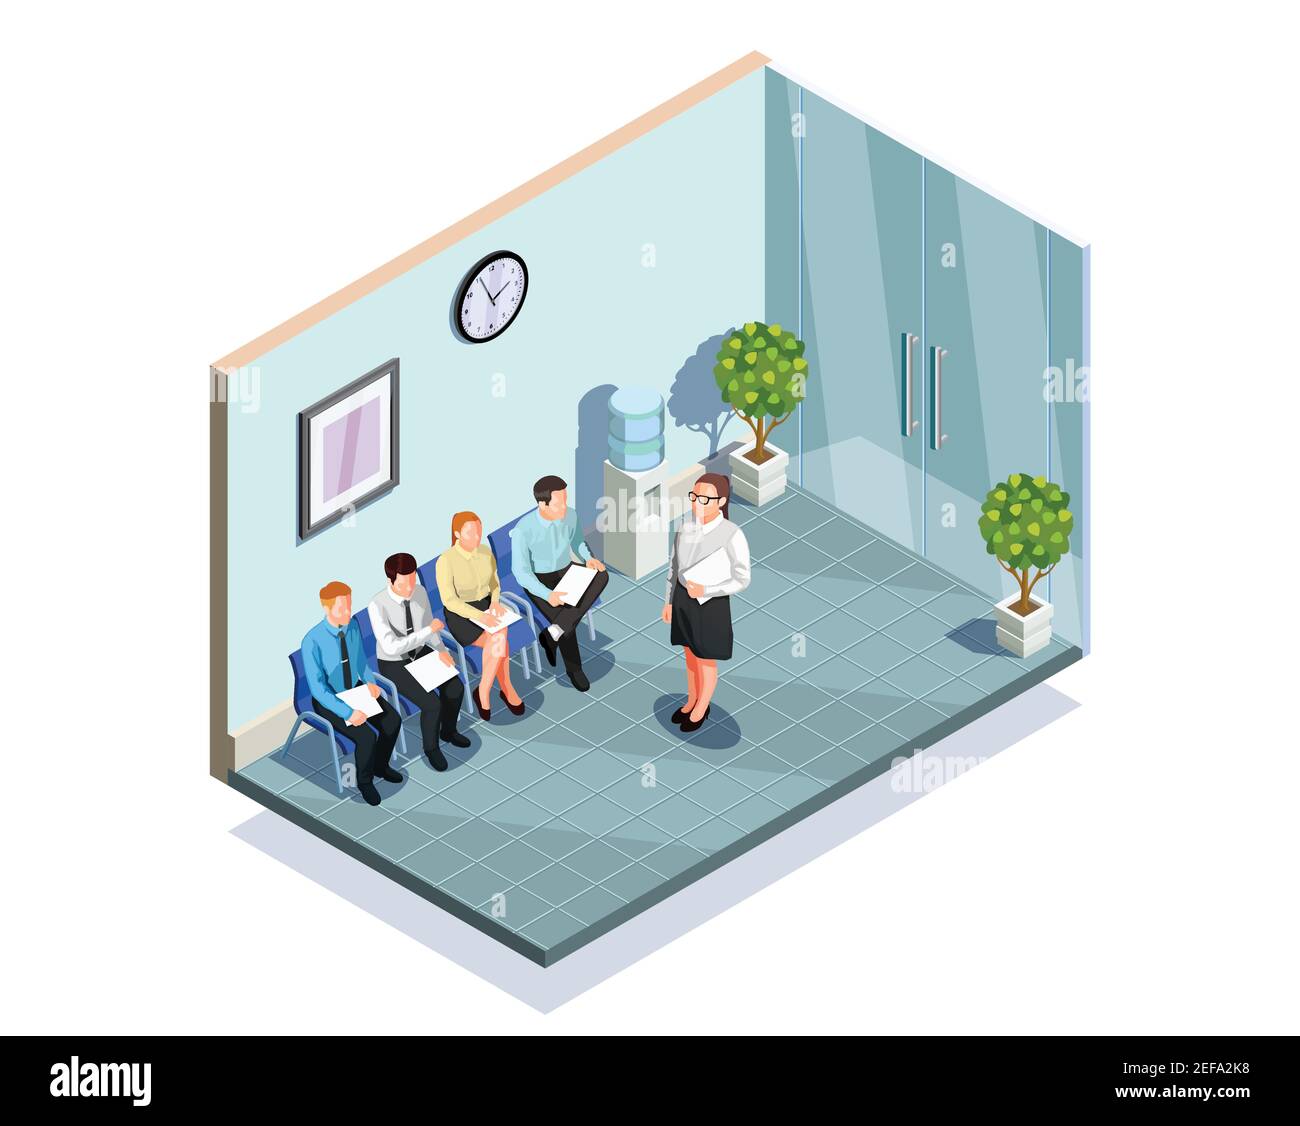 Waiting interview isometric people composition with office reception area interior and delayed job applicants human characters vector illustration Stock Vector